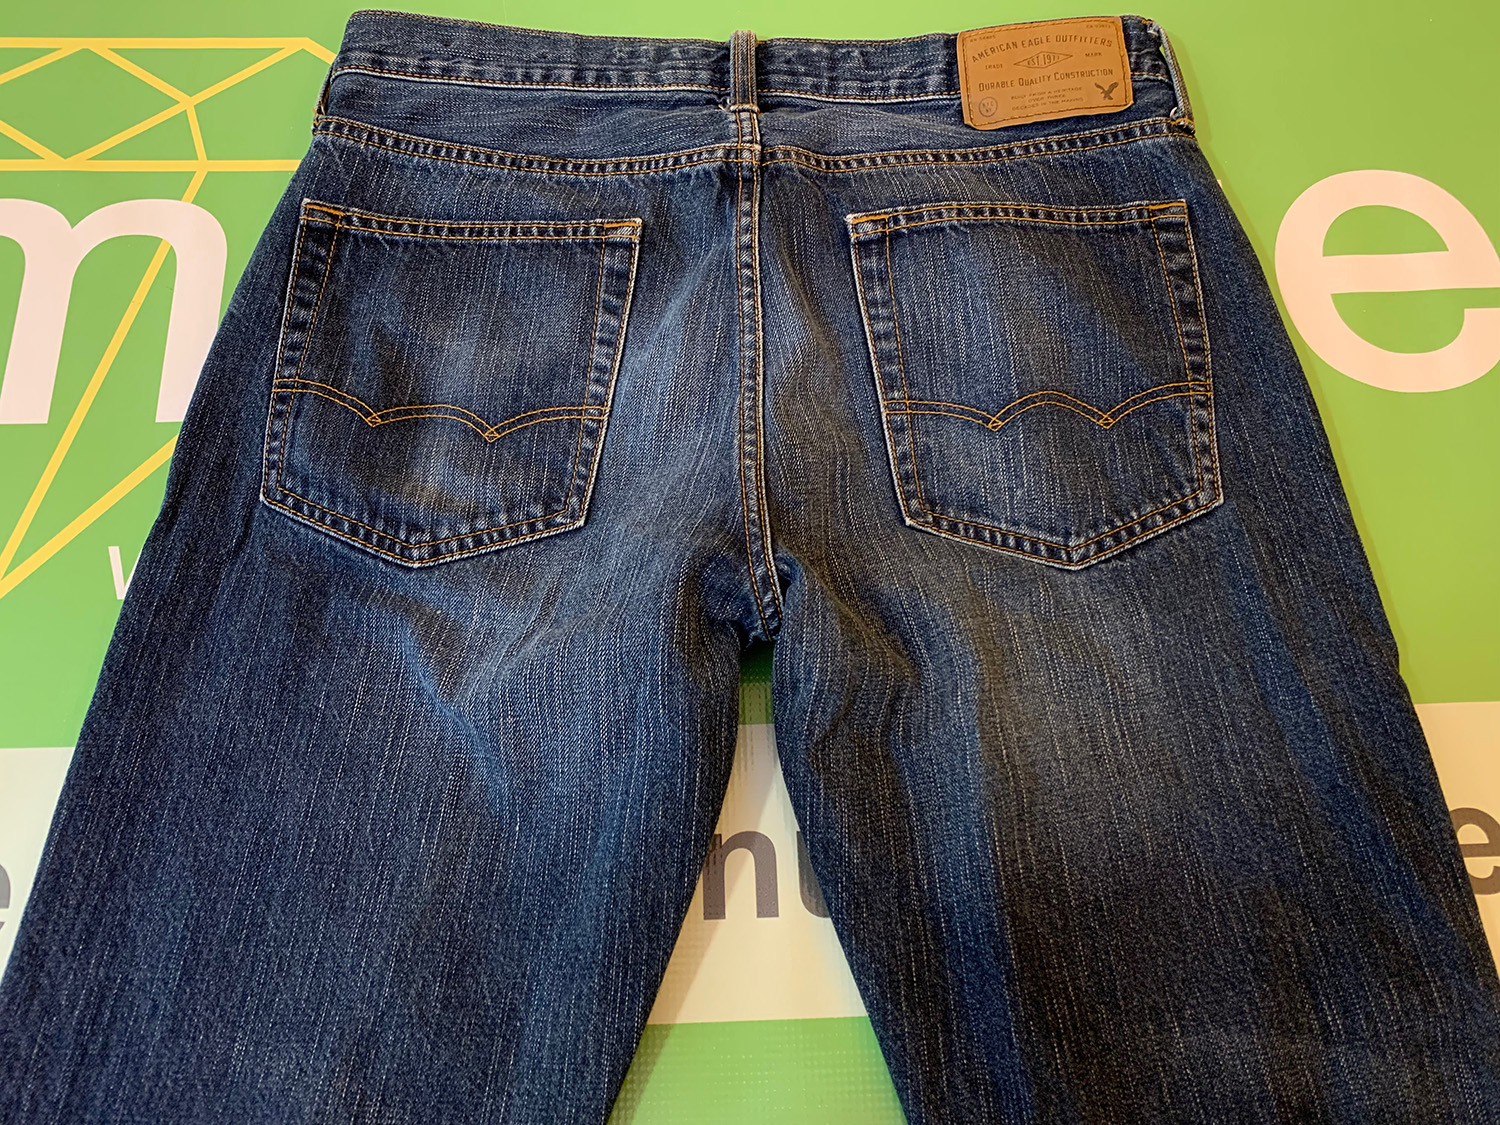 American Eagle Womens Original Straight Jeans Hemmed to 32 x 28 at The MenuGem Web Store